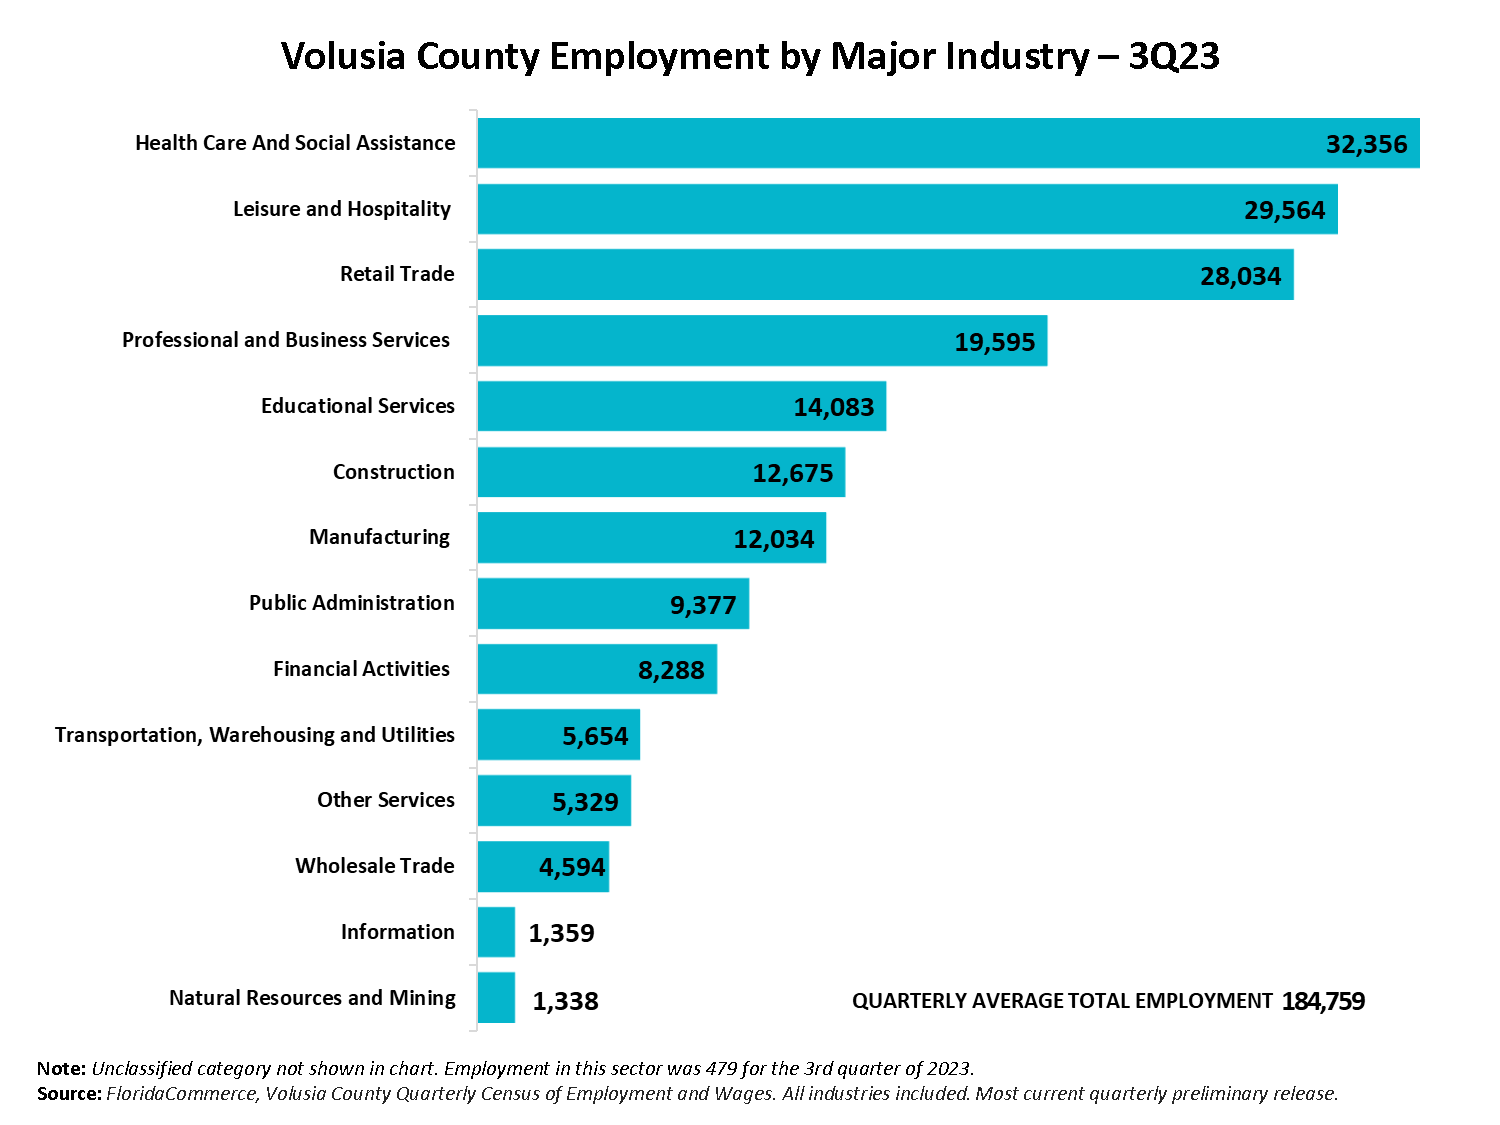 The chart displays industries for the 2nd quarter of 2023 and the employment amounts associated with each for Volusia County. Health Care and Social Assistance – 31,863, Leisure and Hospitality – 30,012, Retail Trade – 28,049, Professional and Business Services – 19,810, Educational Services – 14,948, Construction – 12,418, Manufacturing – 12,169, Public Administration – 9,291, Financial Activities – 8,221, Transportation, Warehousing and Utilities – 5,681, Other Services – 5,264, Wholesale Trade – 4,599, Natural Resources and Mining – 1,389, and Information – 1,314. The quarterly average total employment was 185,436 which is a 3.4% increase over the same period last year in the 2nd quarter of 2022.